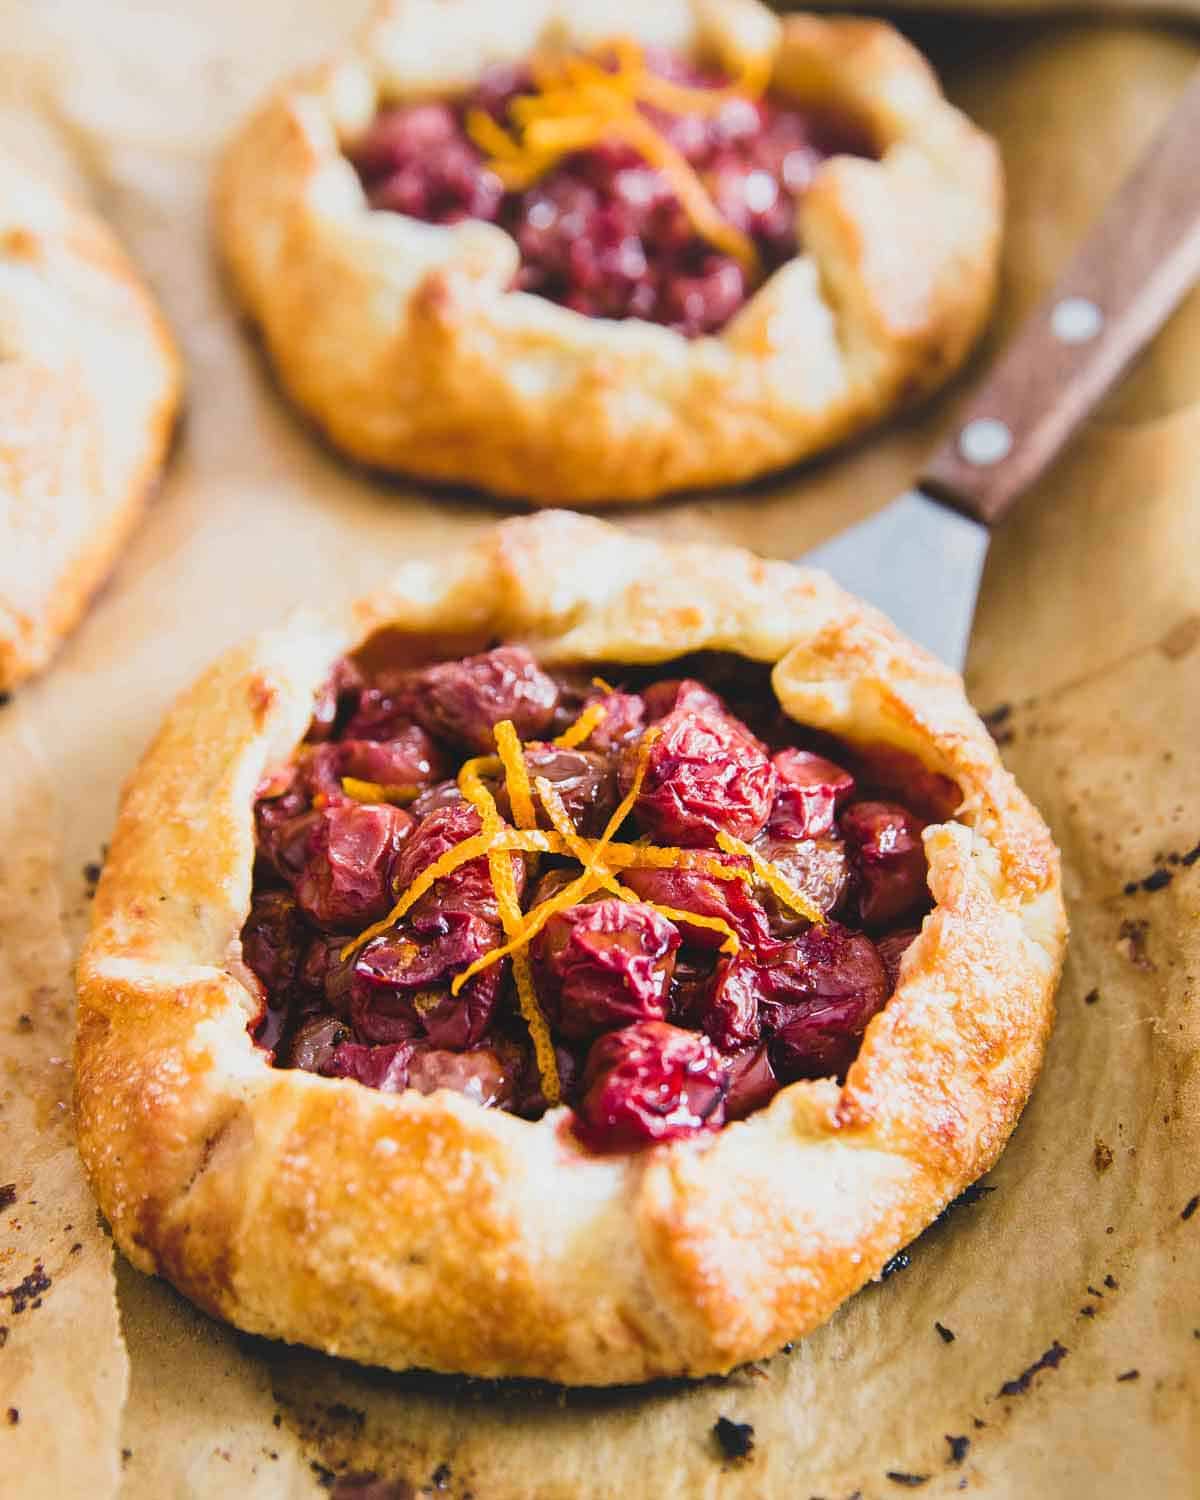 These mini Montmorency tart cherry galettes are filled with sour cherries and orange flavor to create beautiful rustic hand pies that are incredibly simple to make.